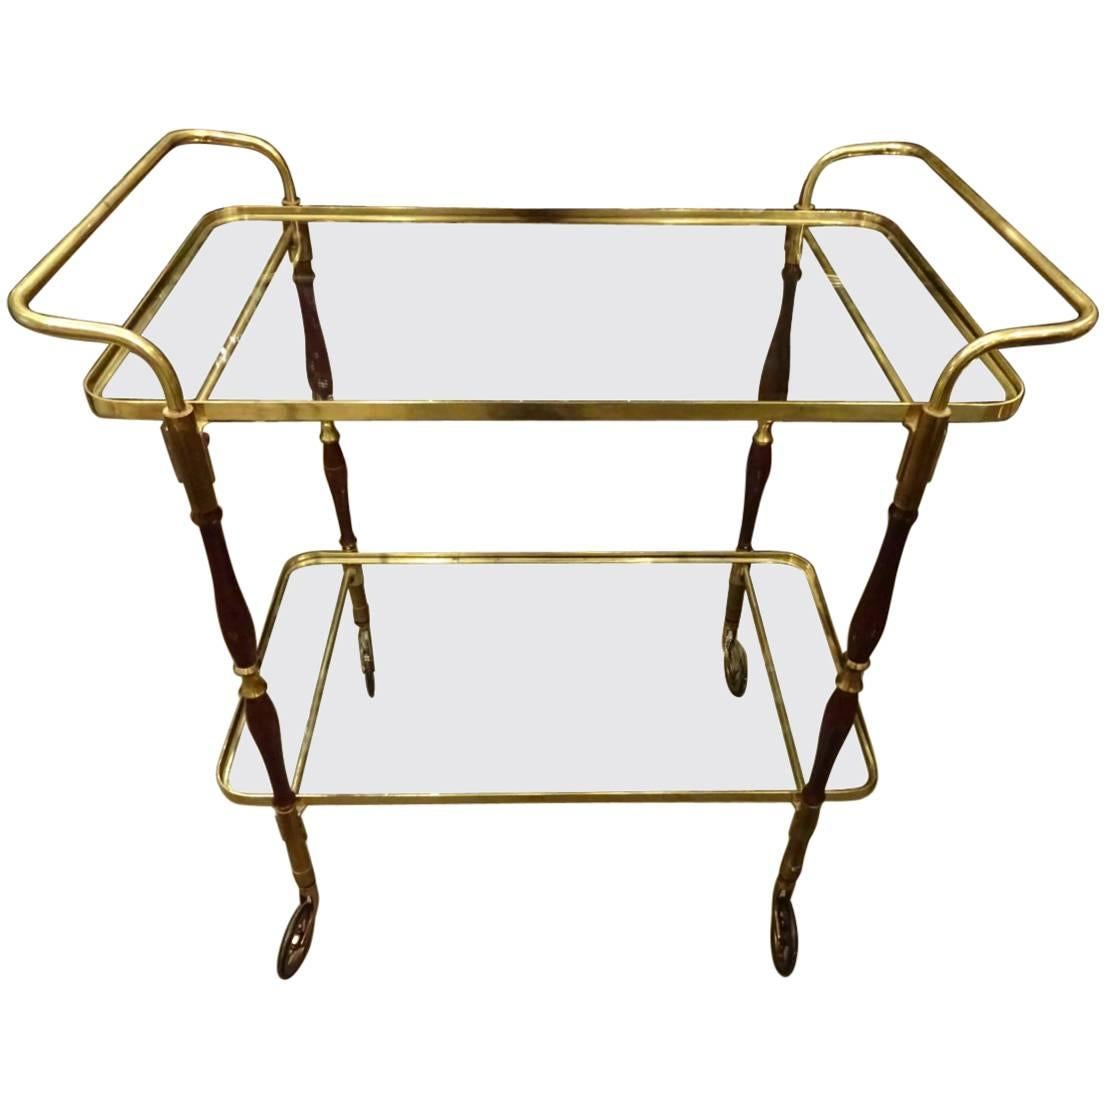 Mid-20th Century French Drinks Trolley